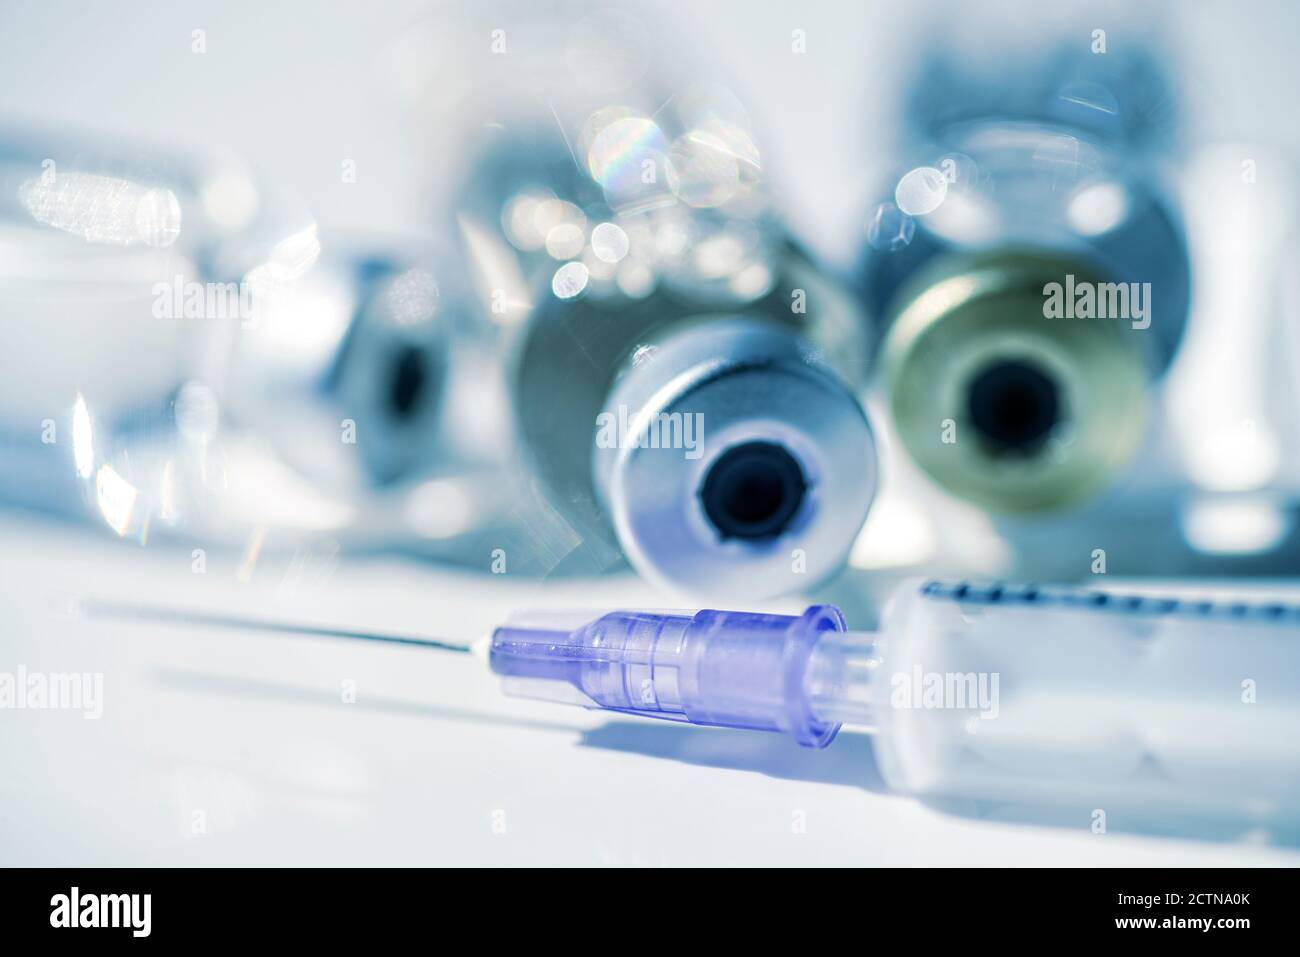 Syringe and three vials with injection material in the background Stock Photo